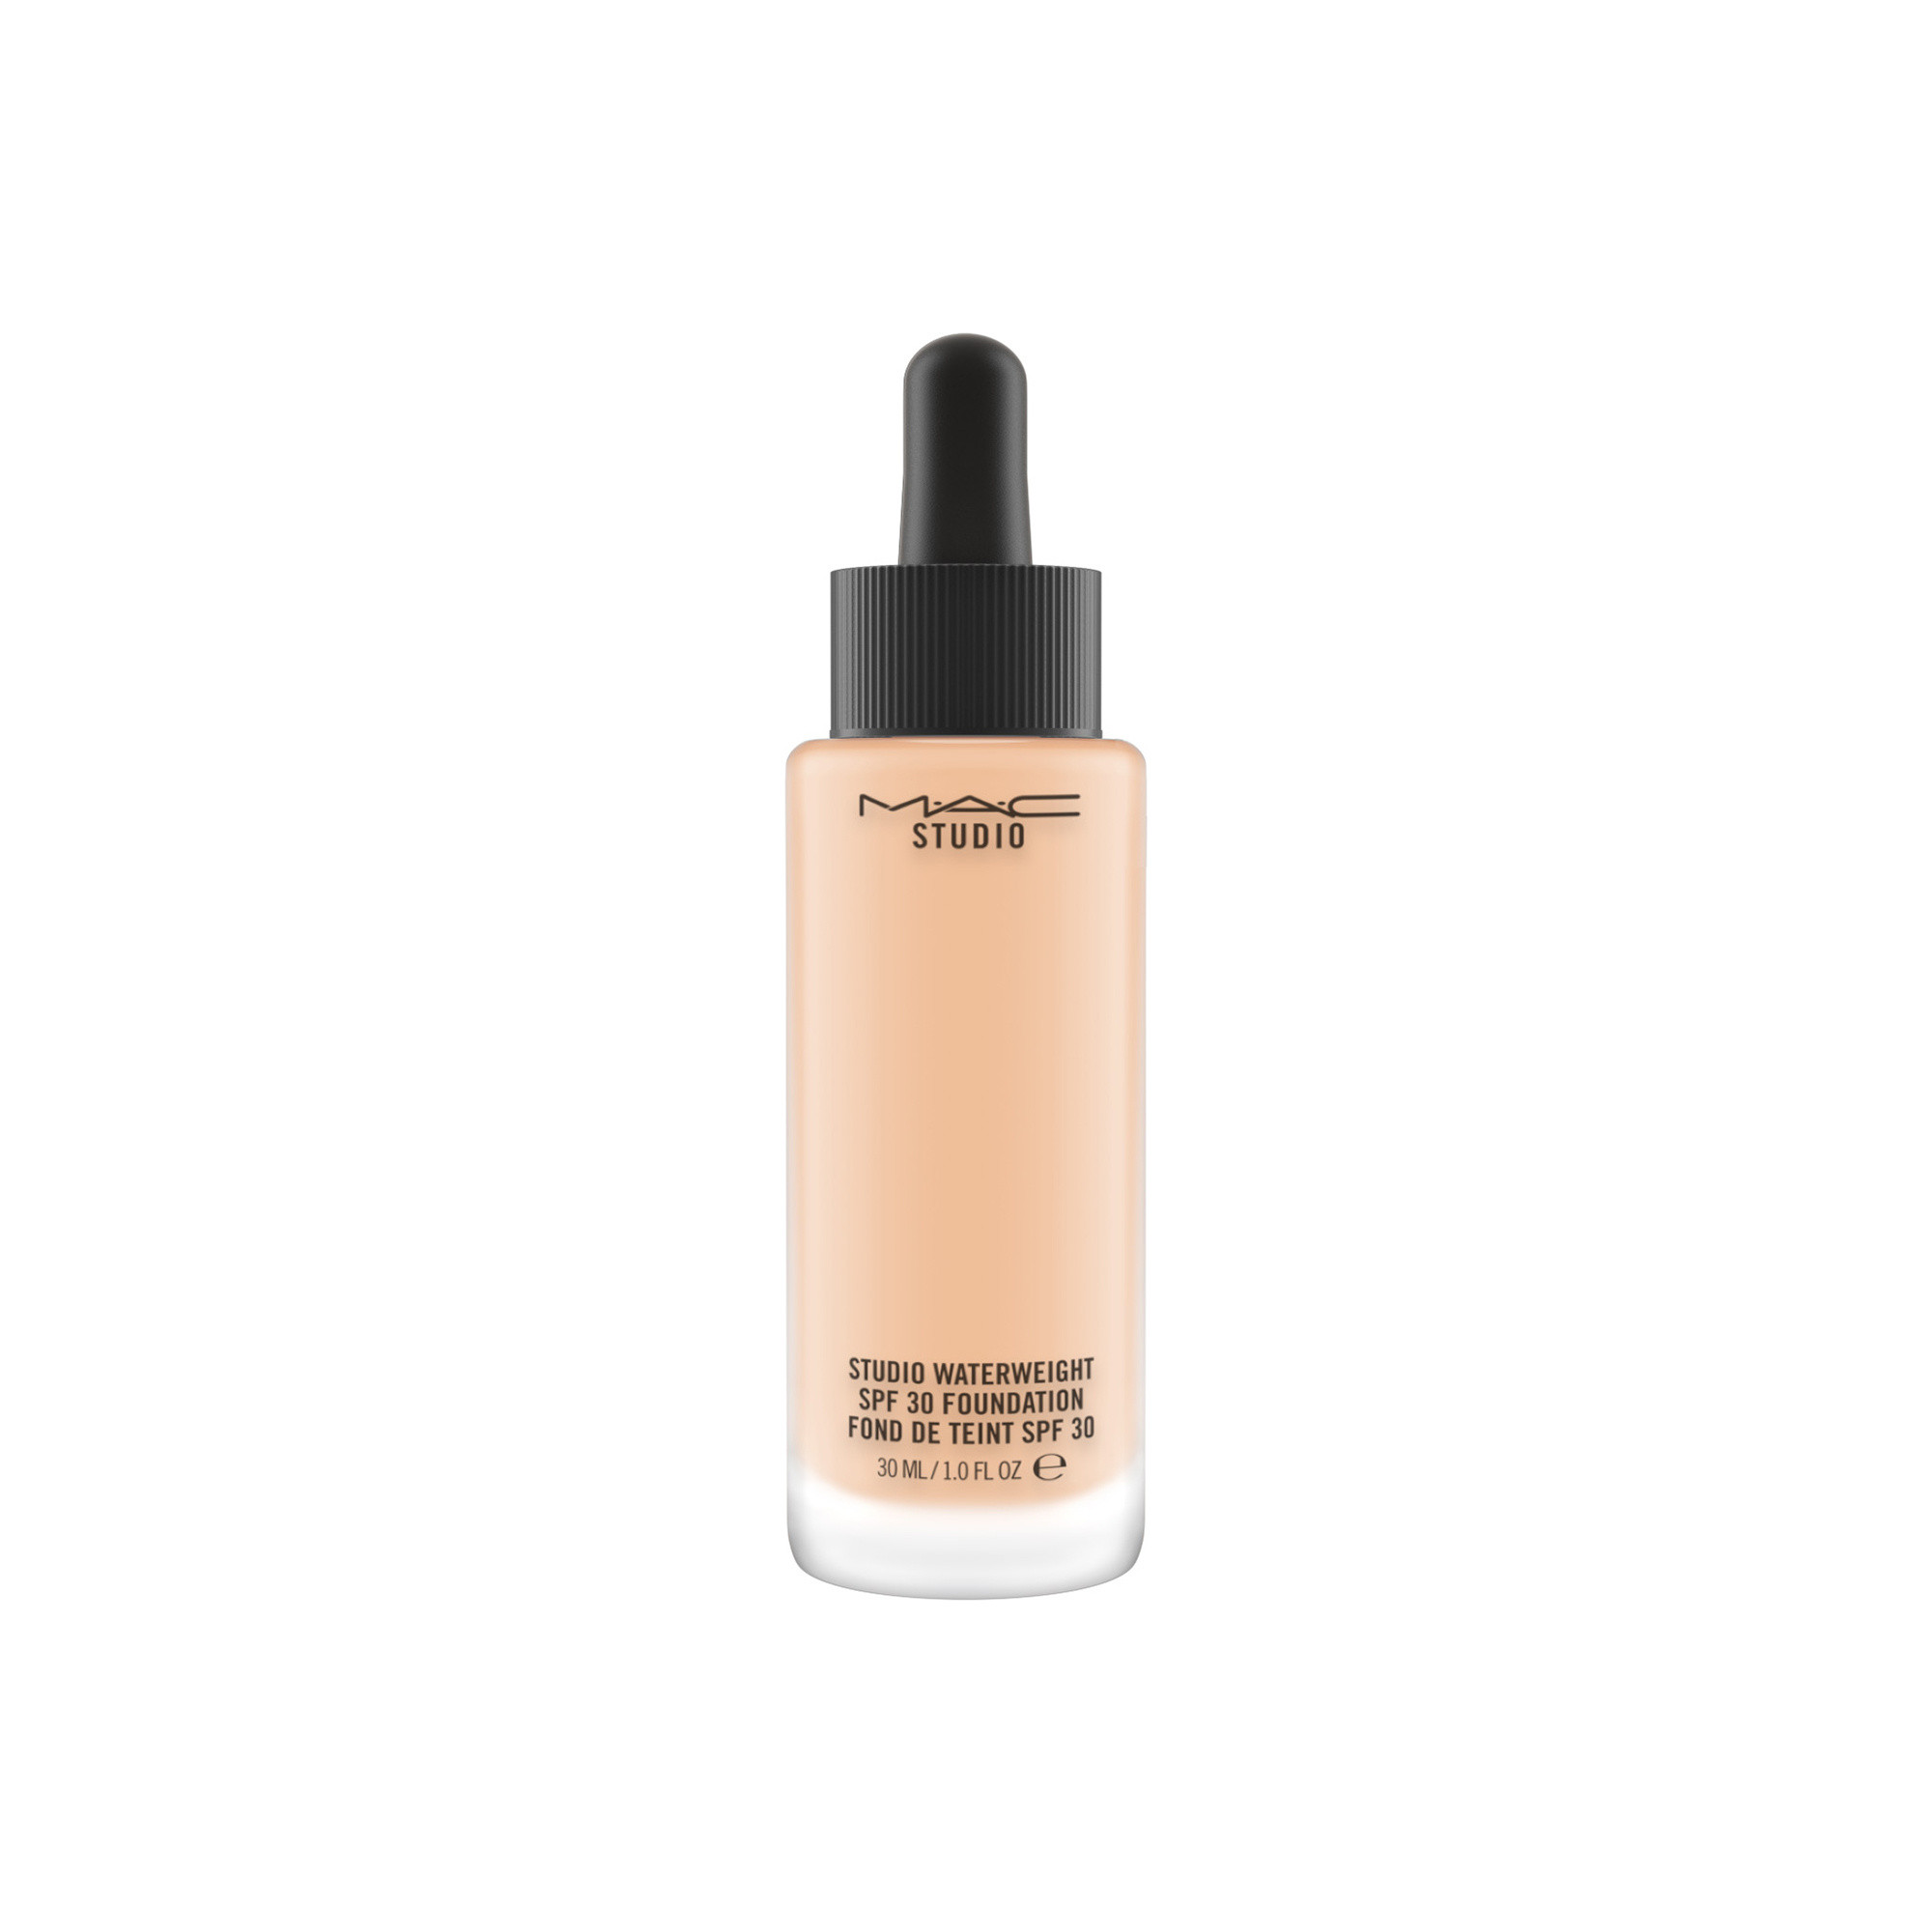 Studio Waterweight Foundation Spf30 - NC25, NC25, large image number 1